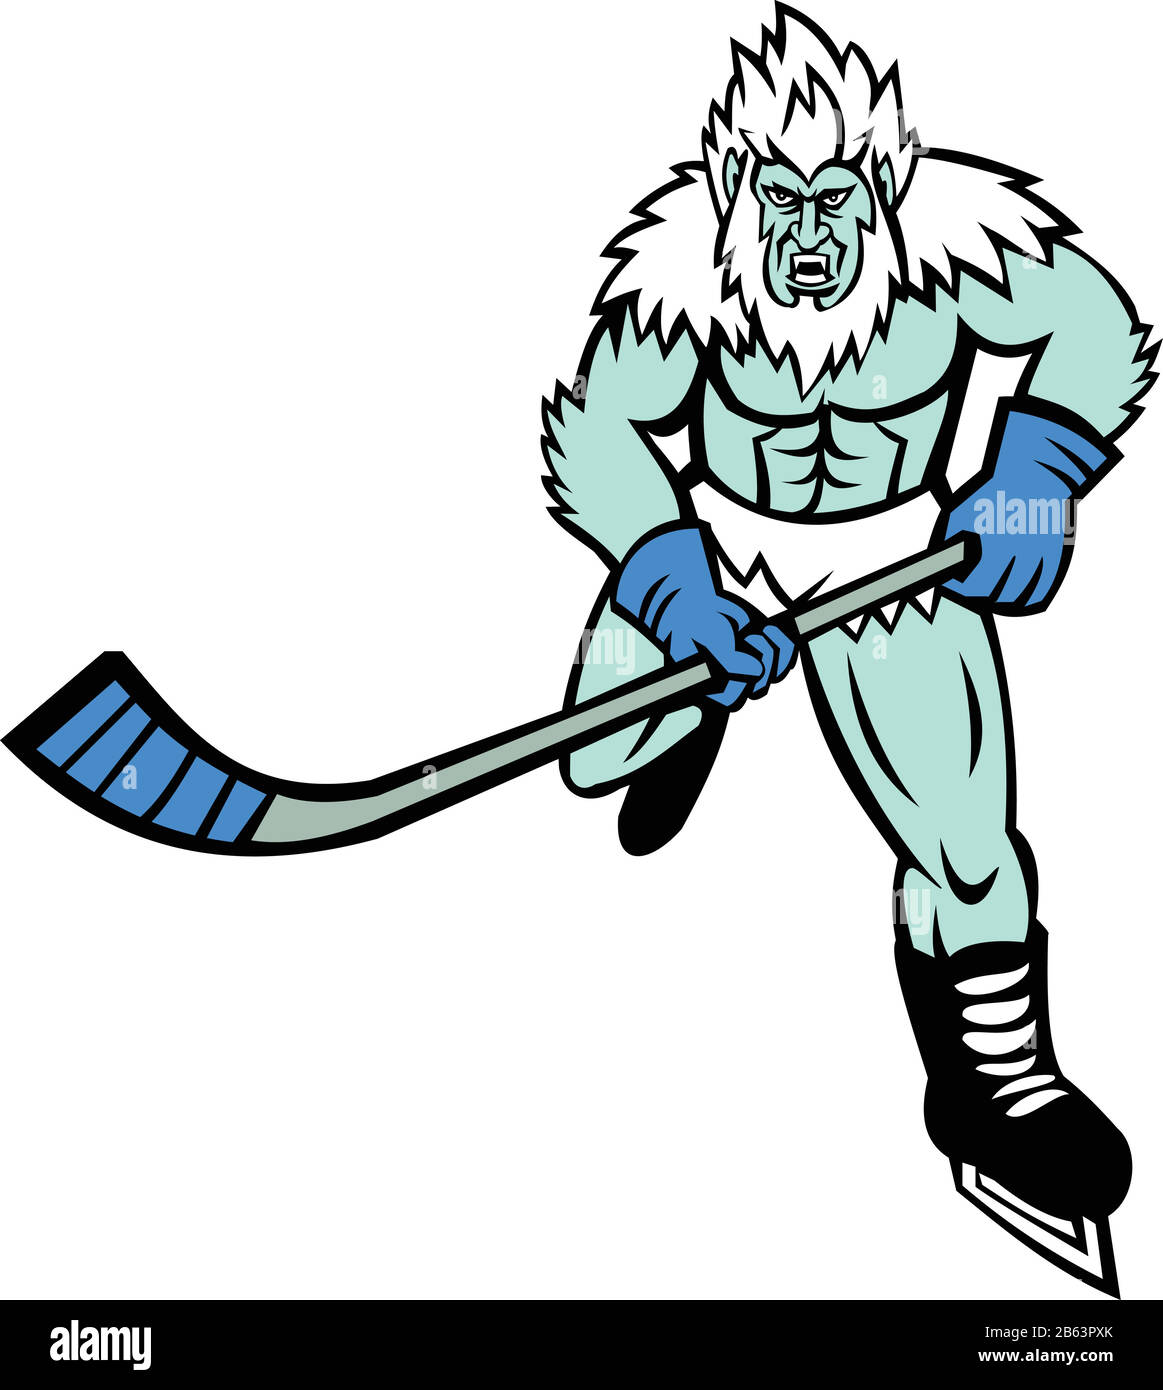 Mascot icon illustration of an angry Yeti or Abominable Snowman, a folkloric ape-like creature, with hockey stick playing ice hockey viewed from front Stock Vector